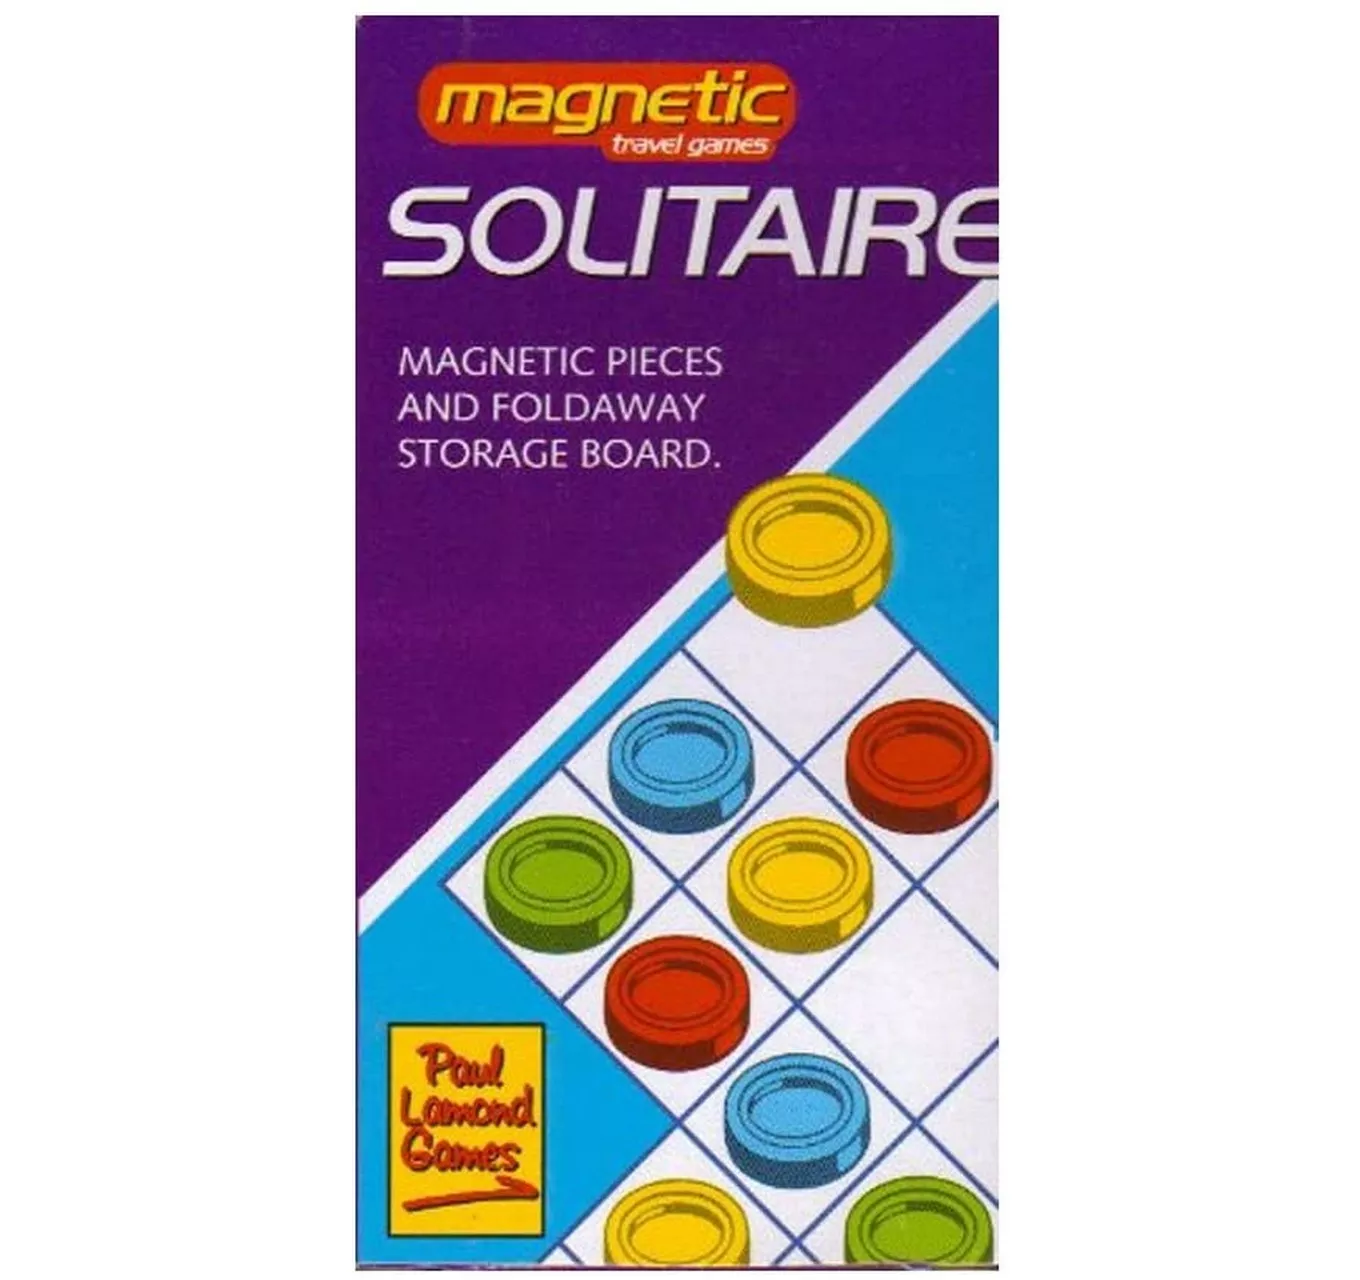 Solitaire Magnetic Travel Game